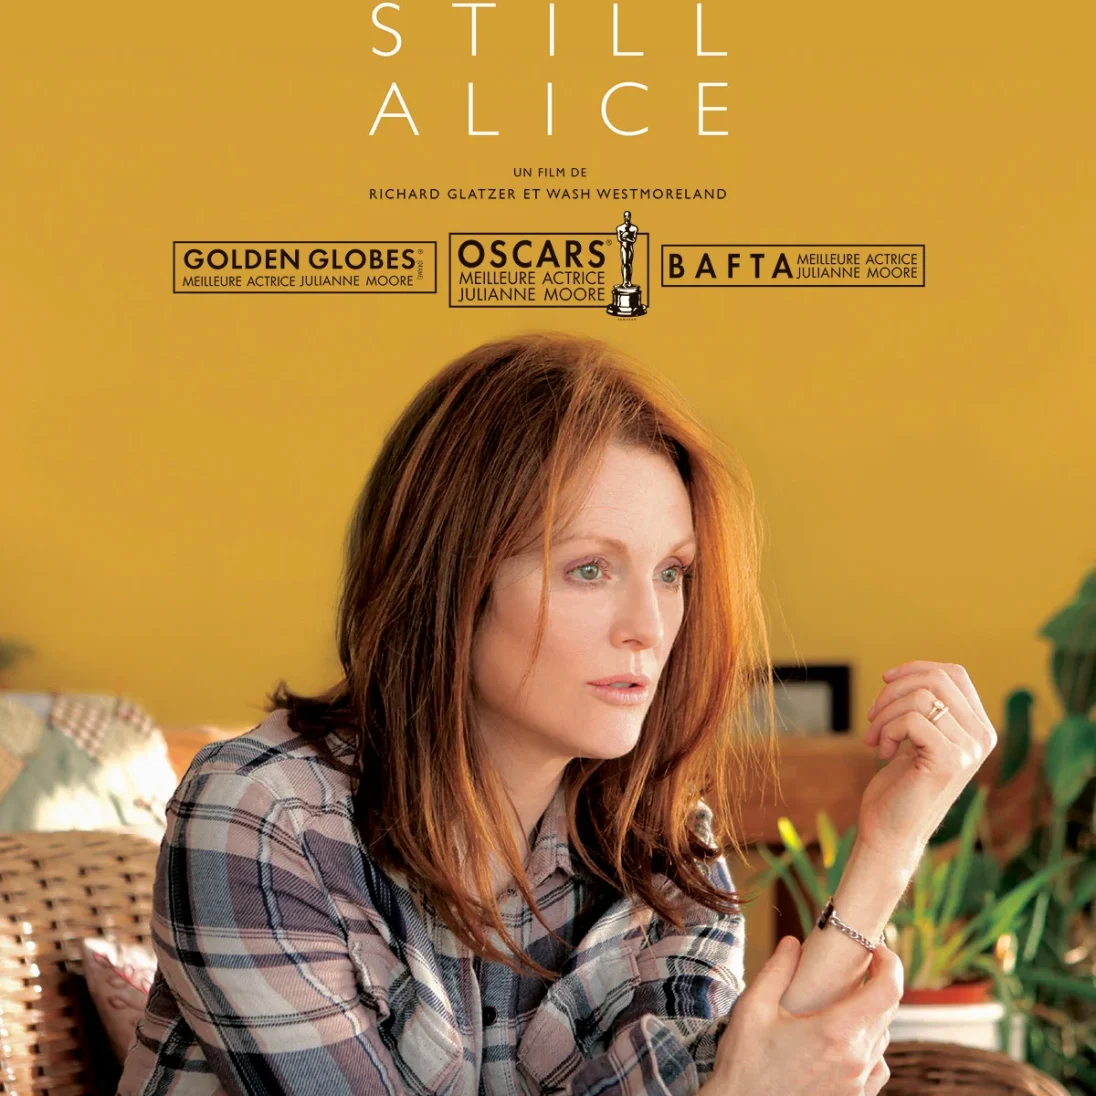 Ciné-causerie – TOUJOURS ALICE